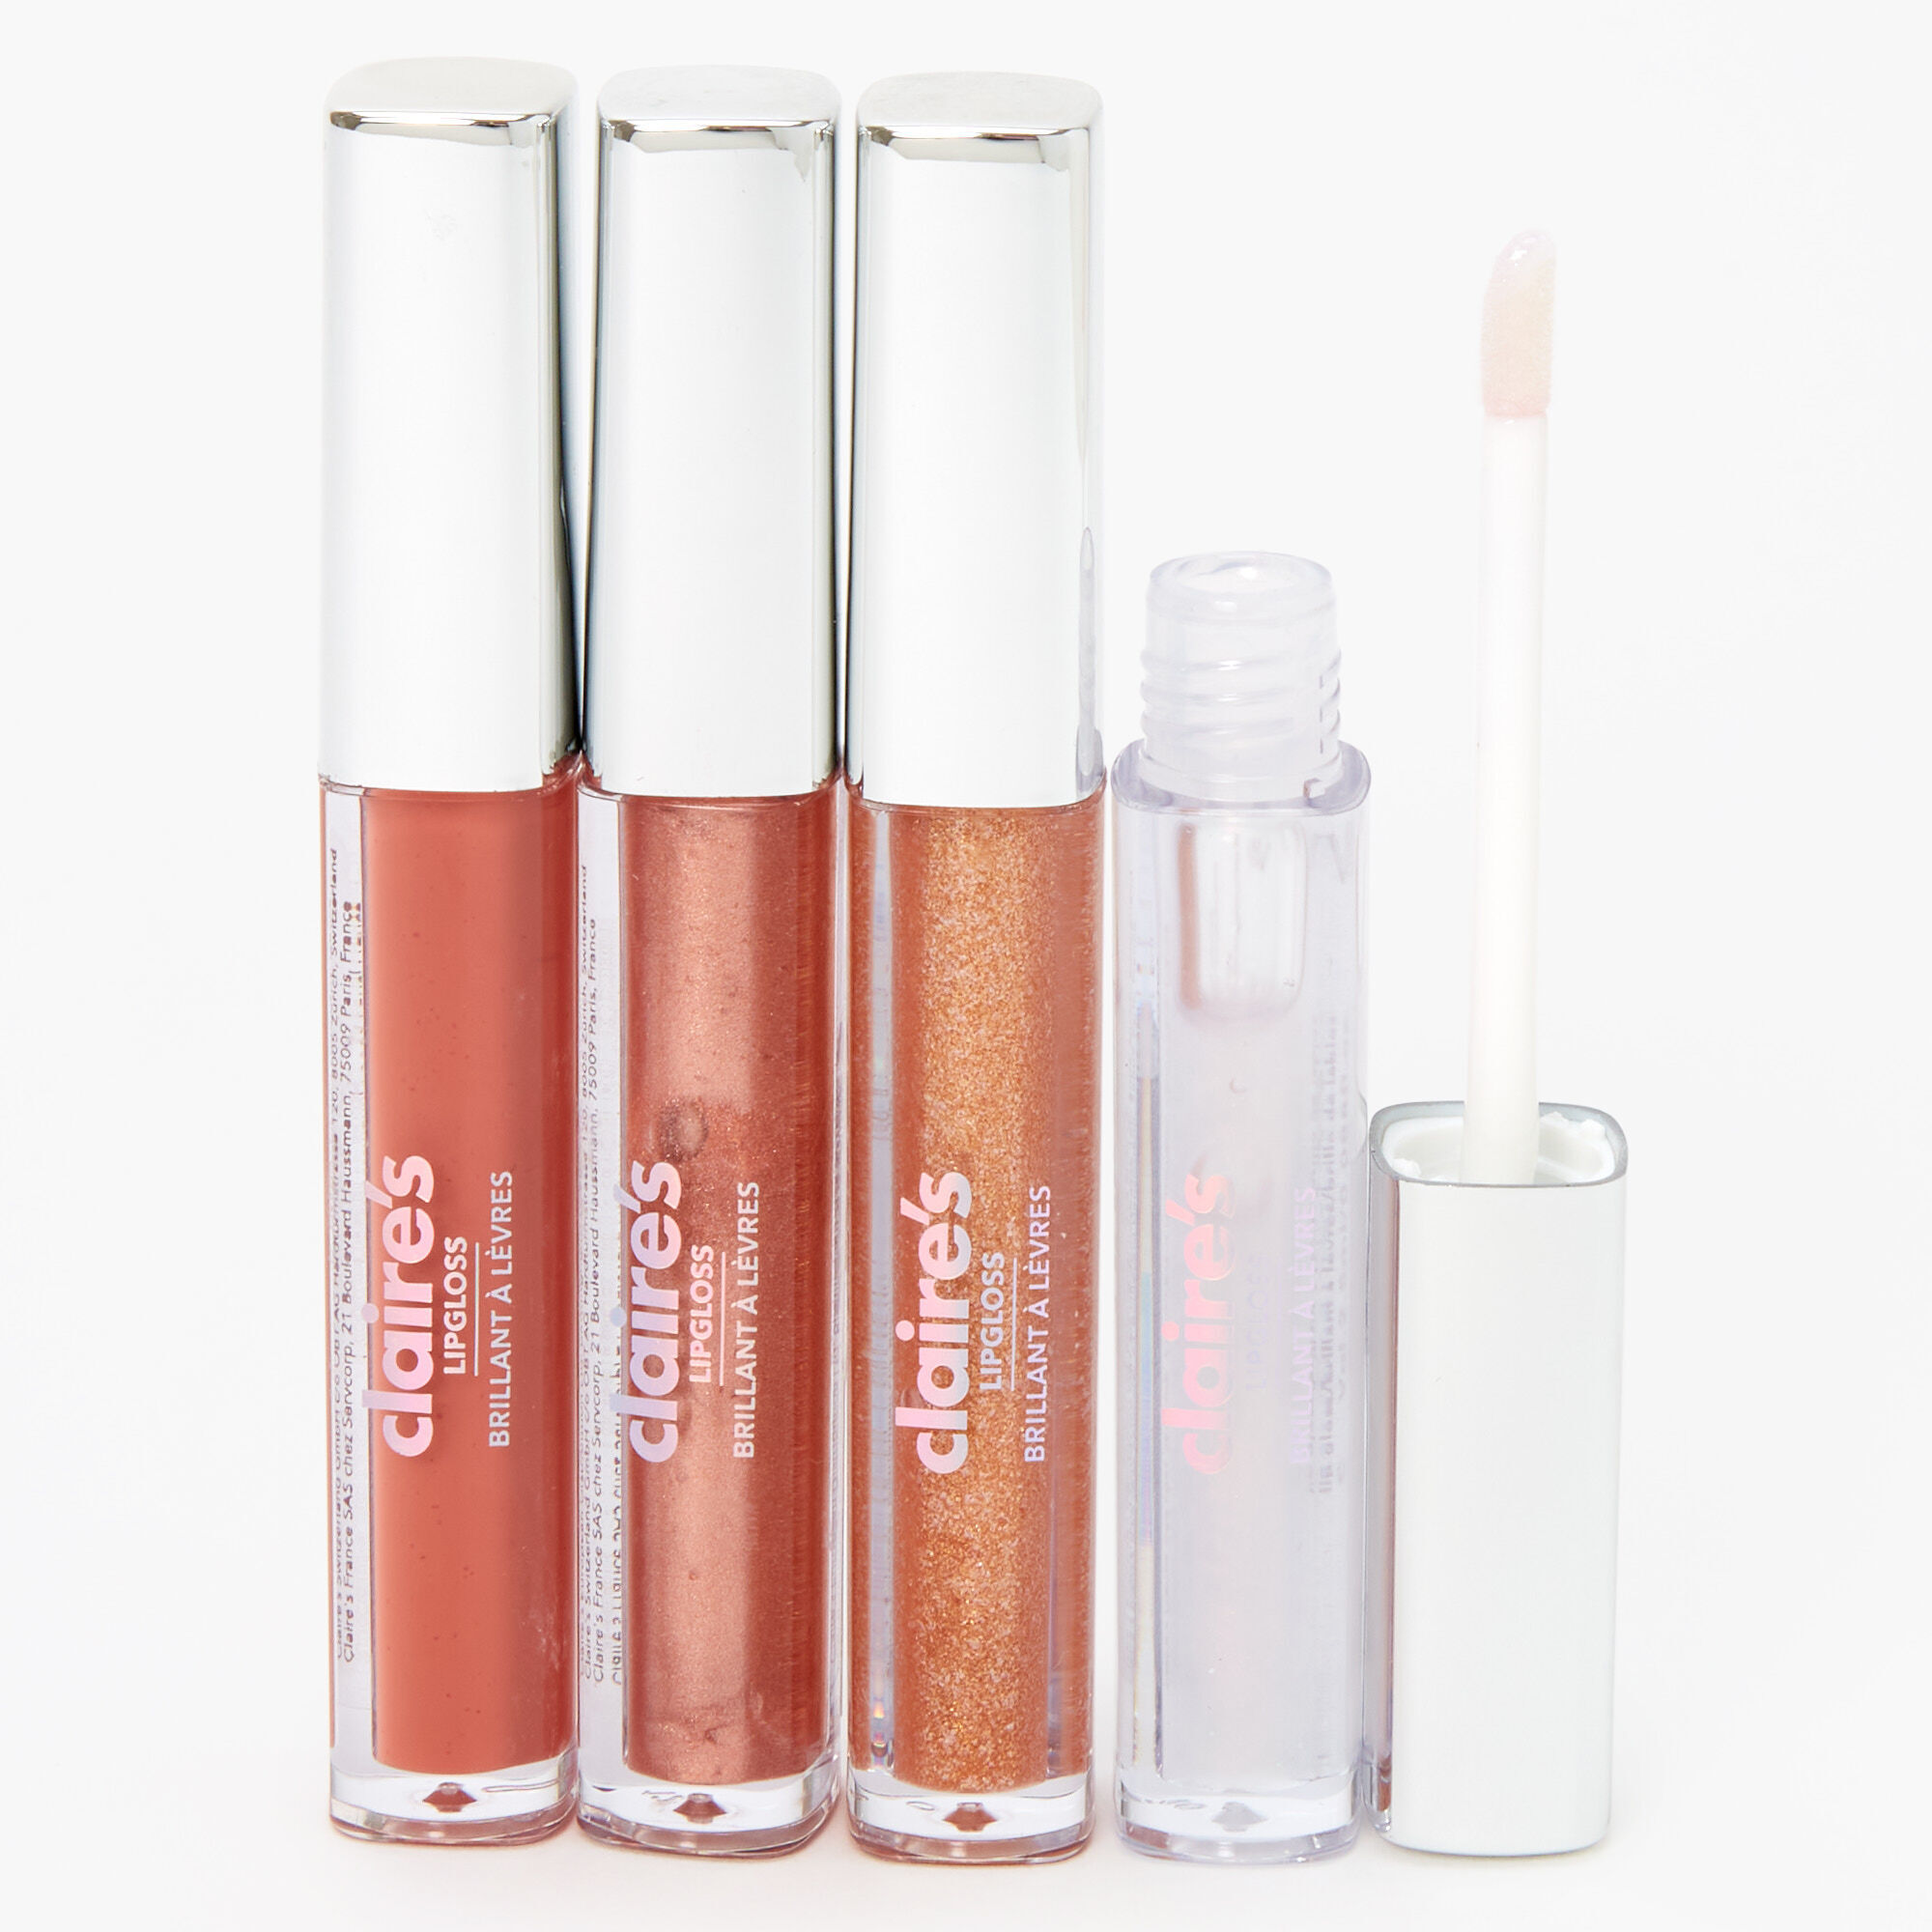 Bronzed Nude Shimmer Lip Gloss Set - 4 Pack | Claire's